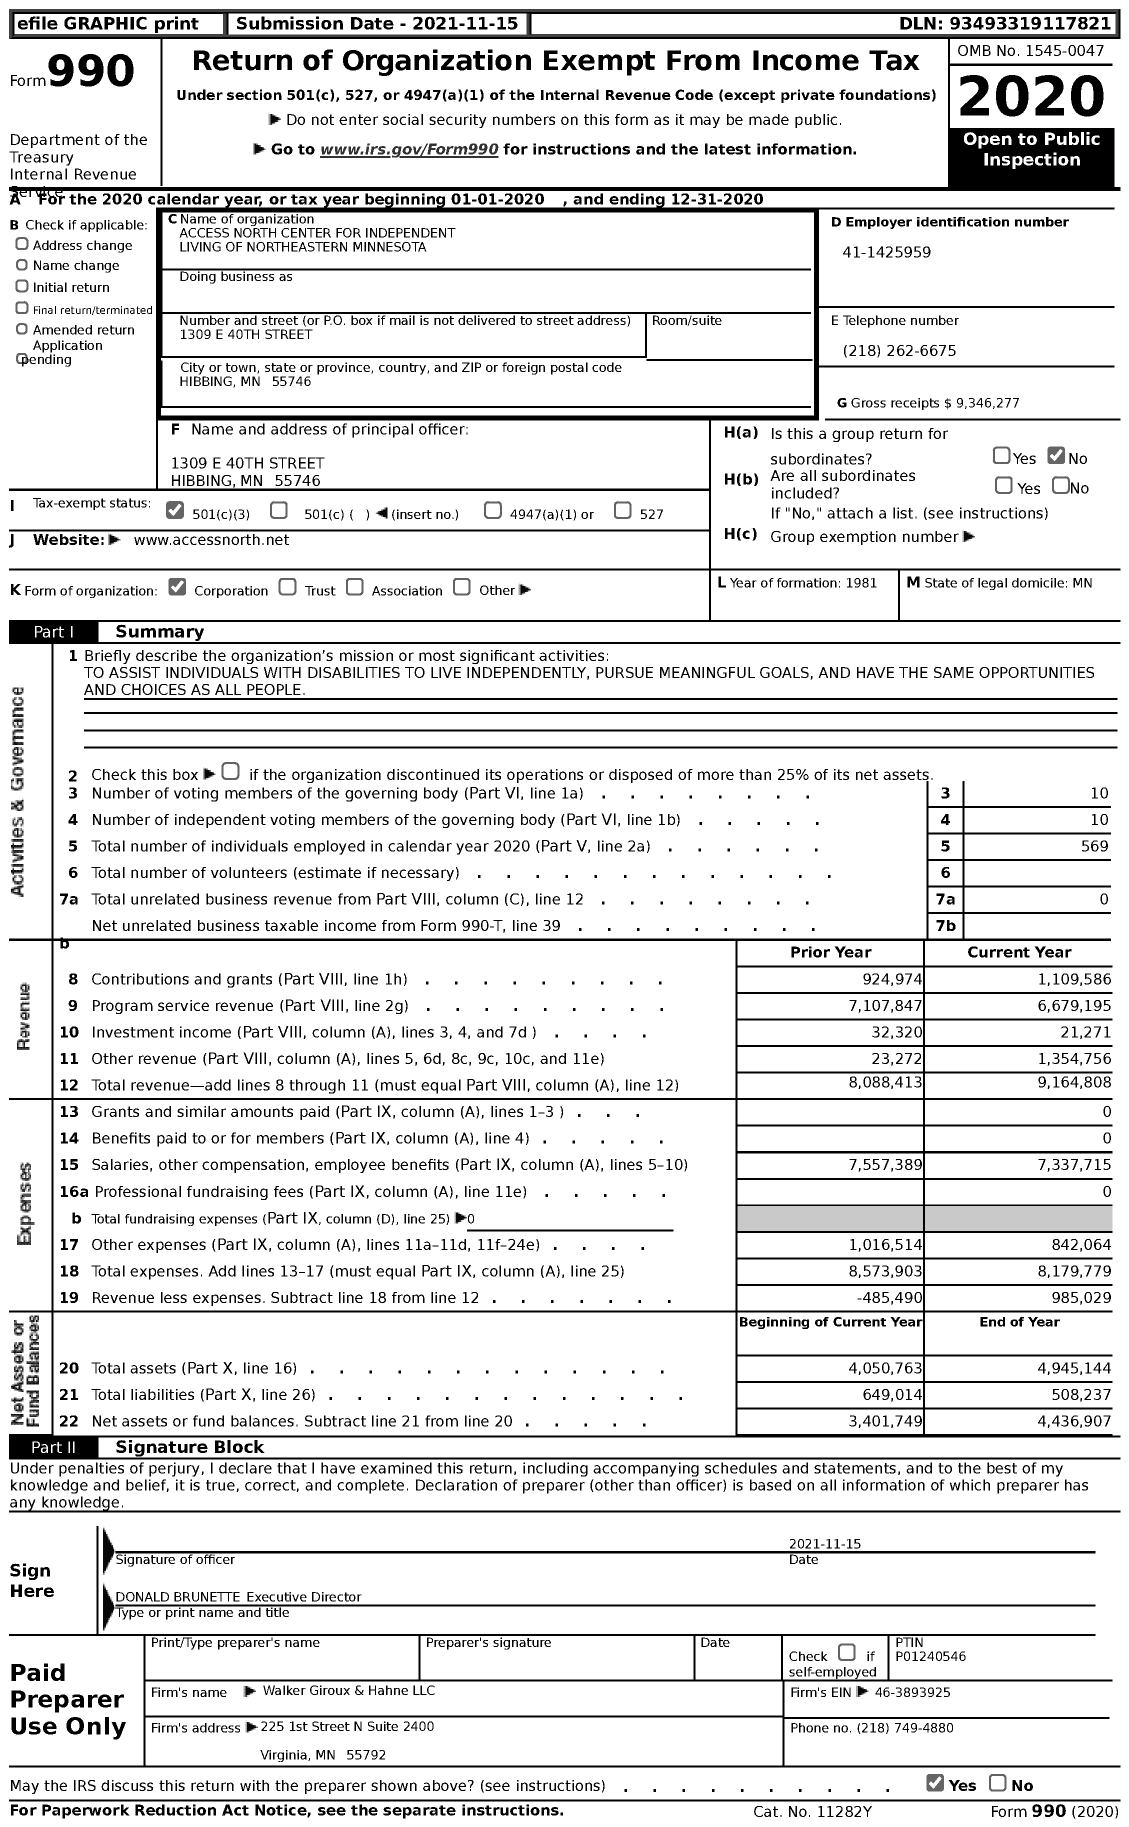 Image of first page of 2020 Form 990 for Access North Center for Independent Living of Northeastern Minnesota